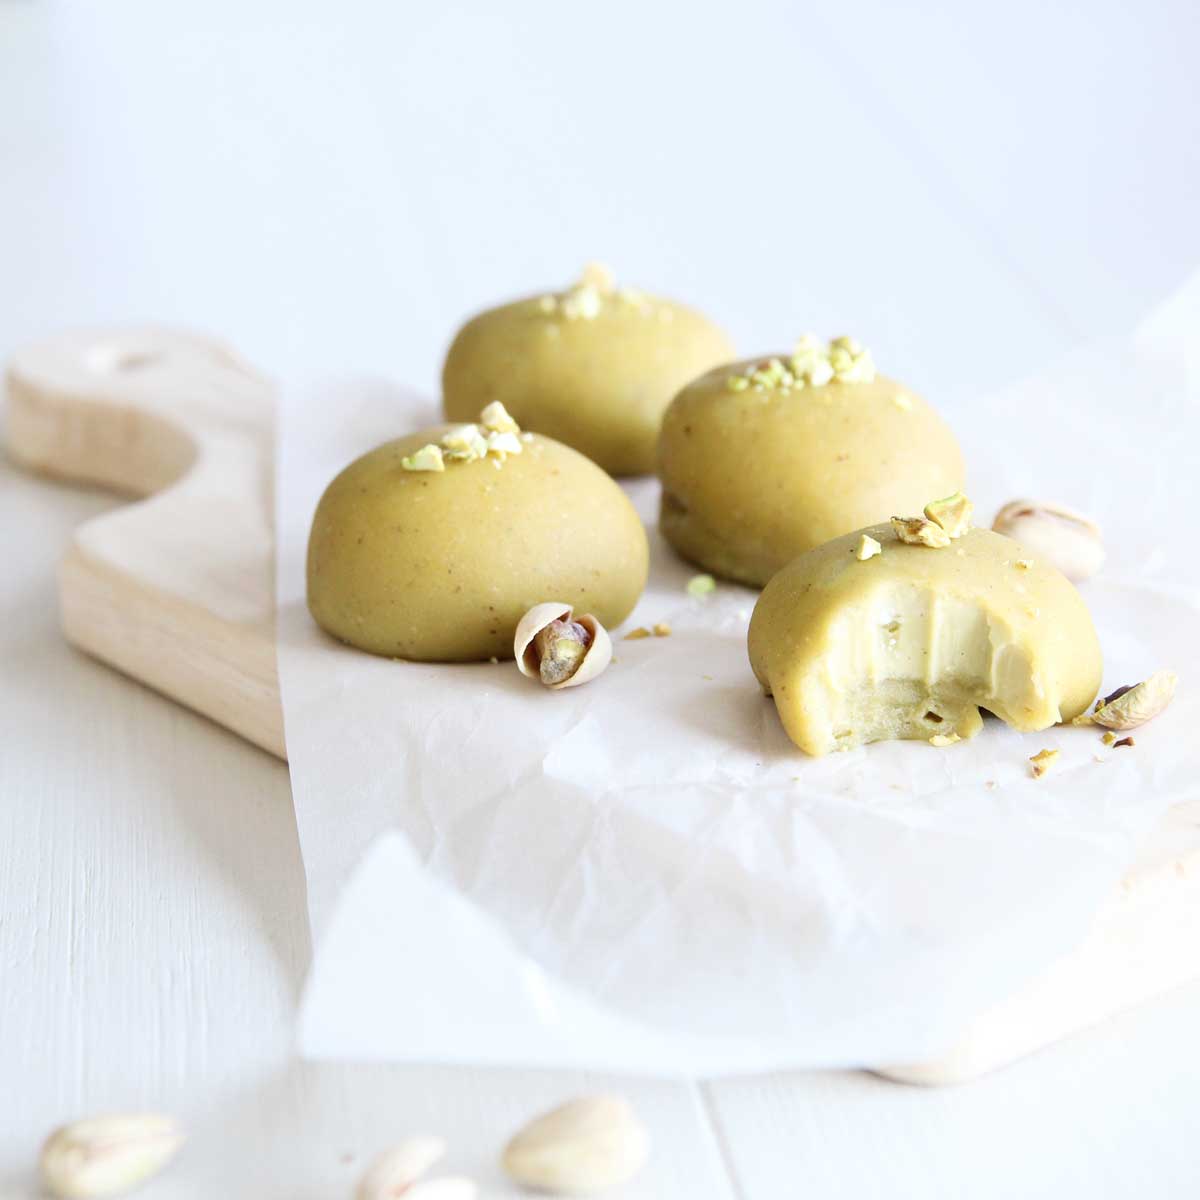 The Best Ever Pistachio Butter Mochi (Made with Mochiko Flour) - Red Bean Mochi Cake